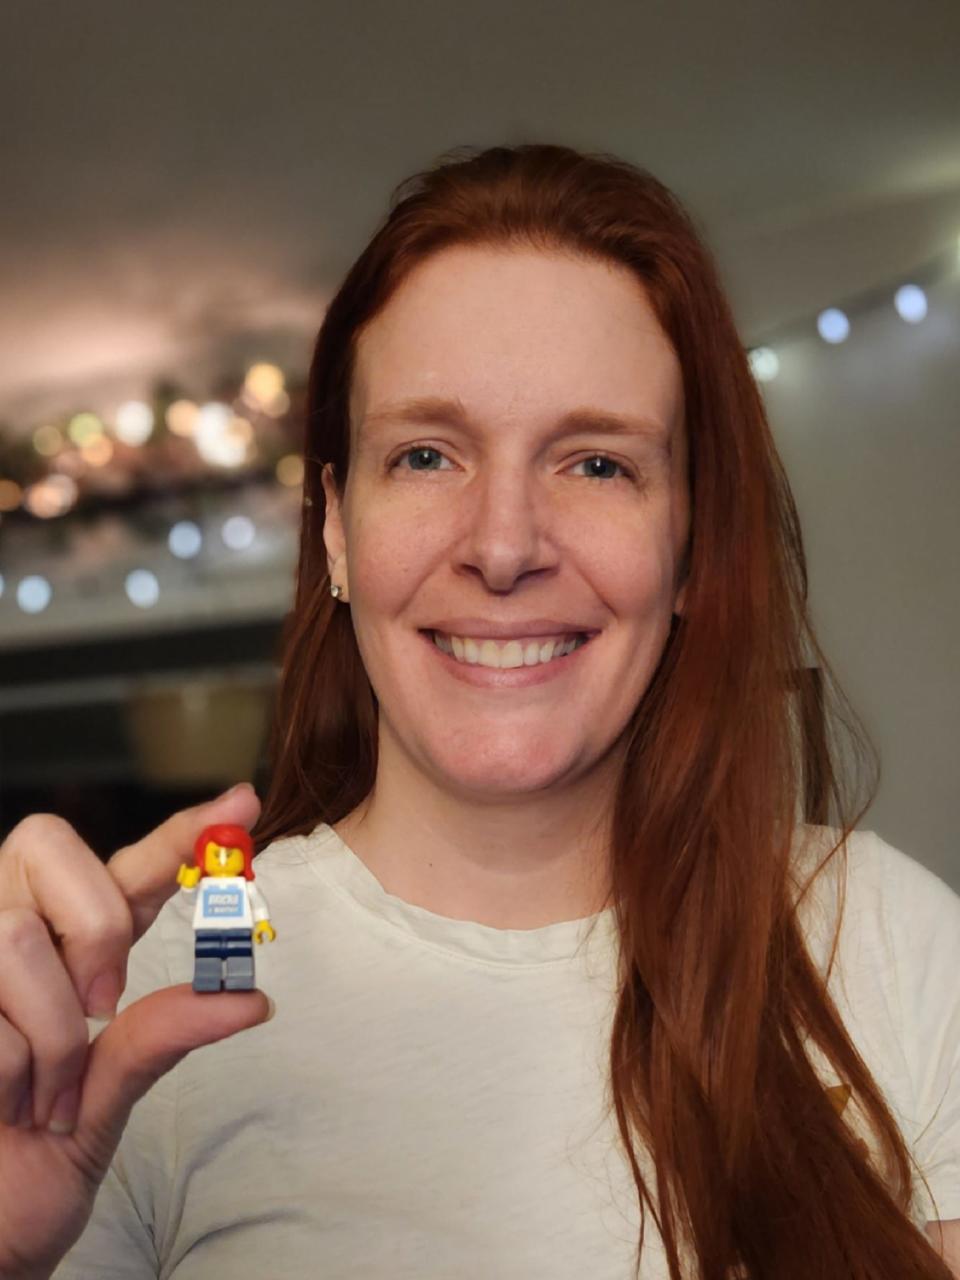 Jessica VandeLeest, a Racine resident, is opening a Bricks & Minifigs store at 2838 W. Rawson Ave. in Franklin on Jan. 27. The franchise focuses on buying, selling and trading LEGO.